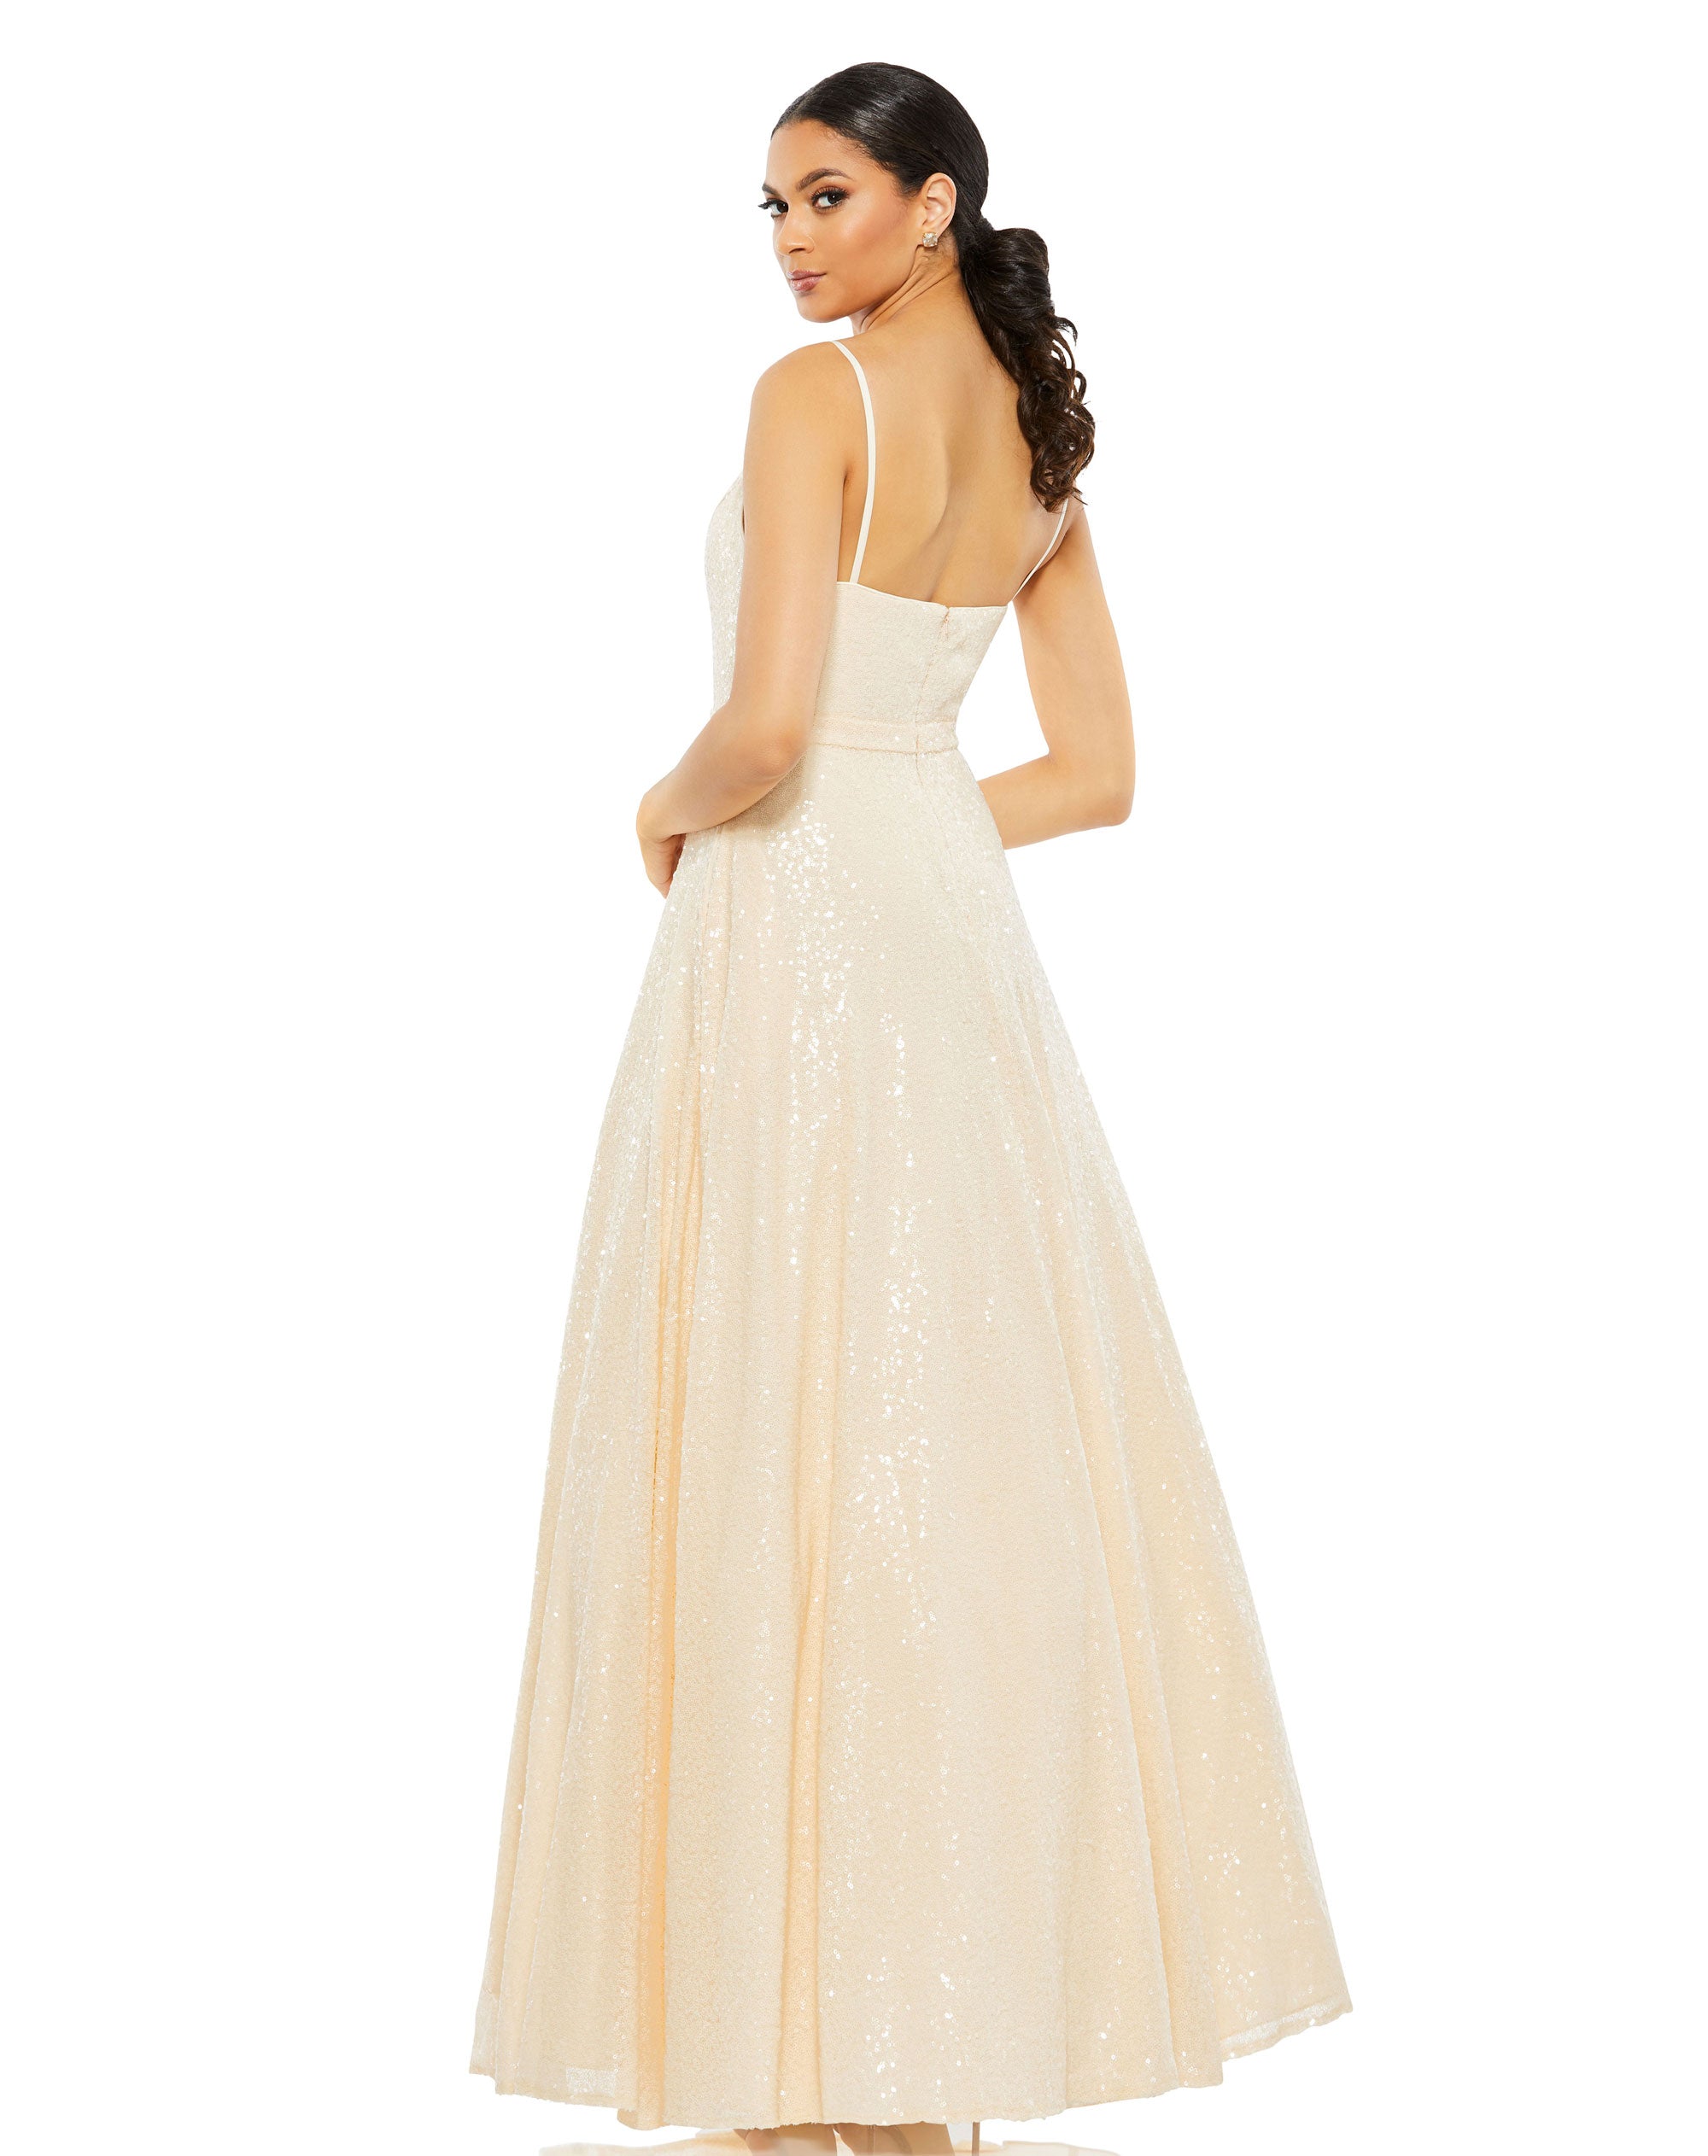 V-Neck Sequined Ball Gown